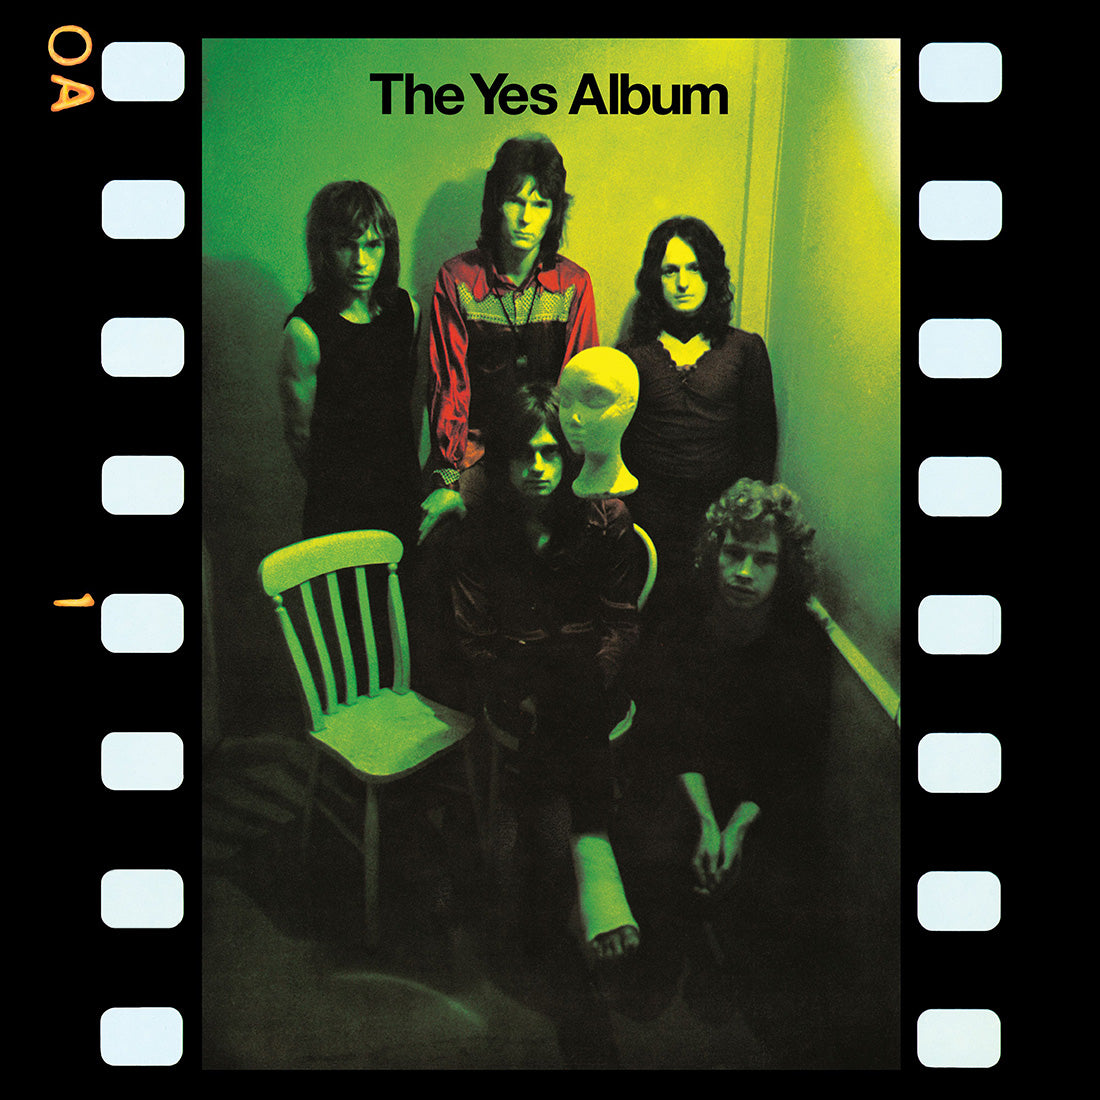 Yes - The Yes Album (Super Deluxe Edition): Vinyl LP, CD & Blu-Ray Box Set